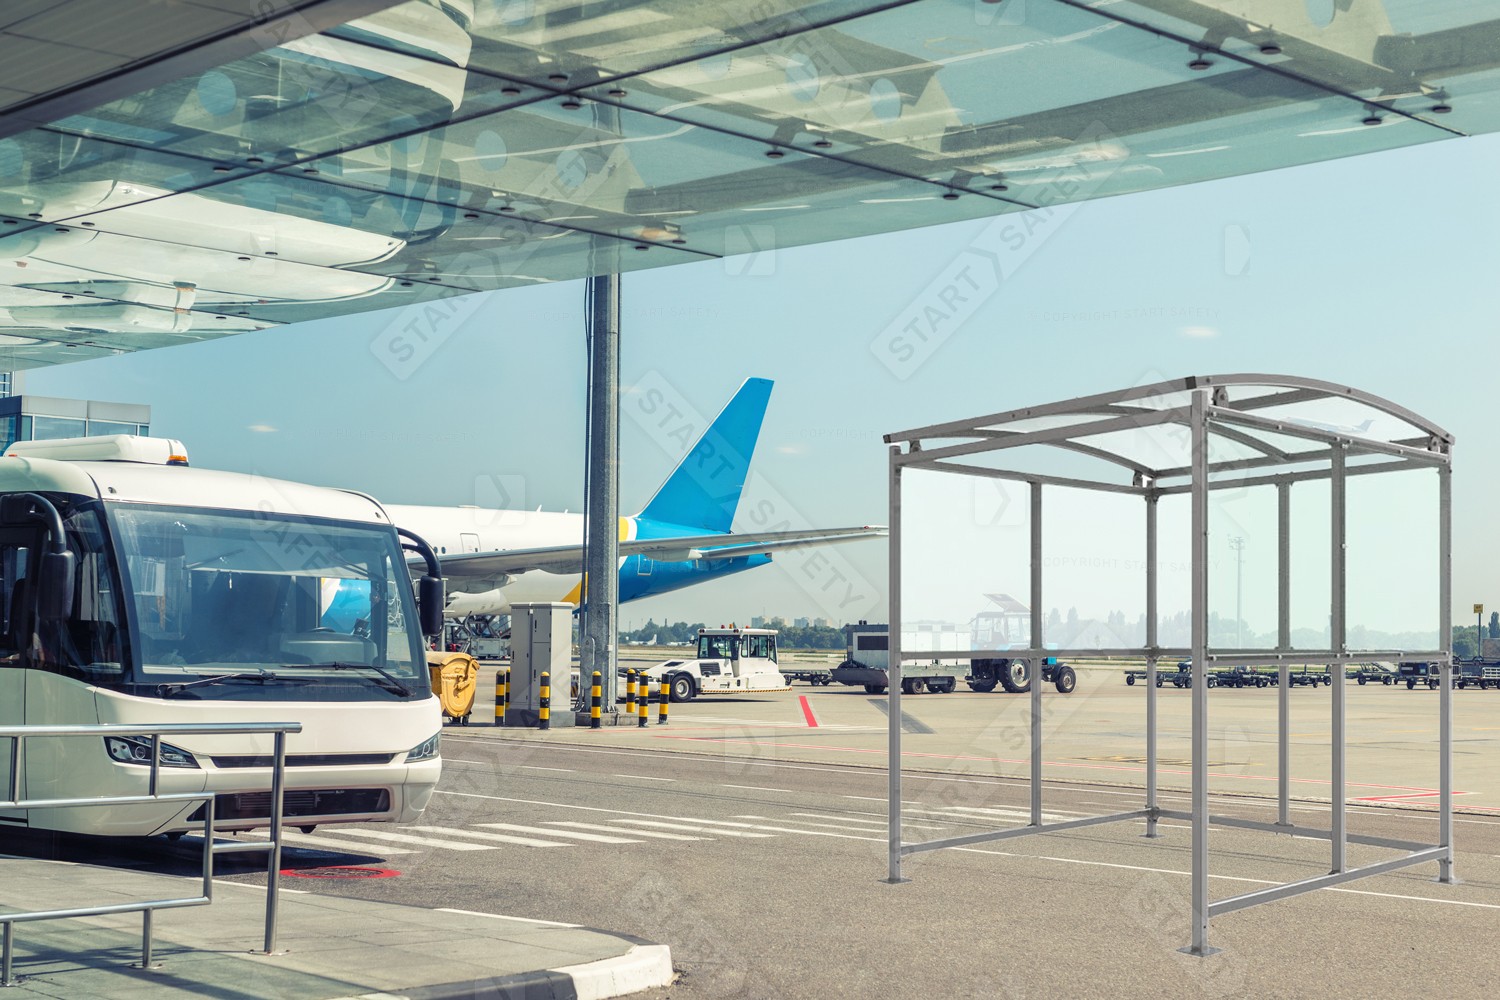 Autopa Brandon Smoking Shelter Installation Example in an Airport